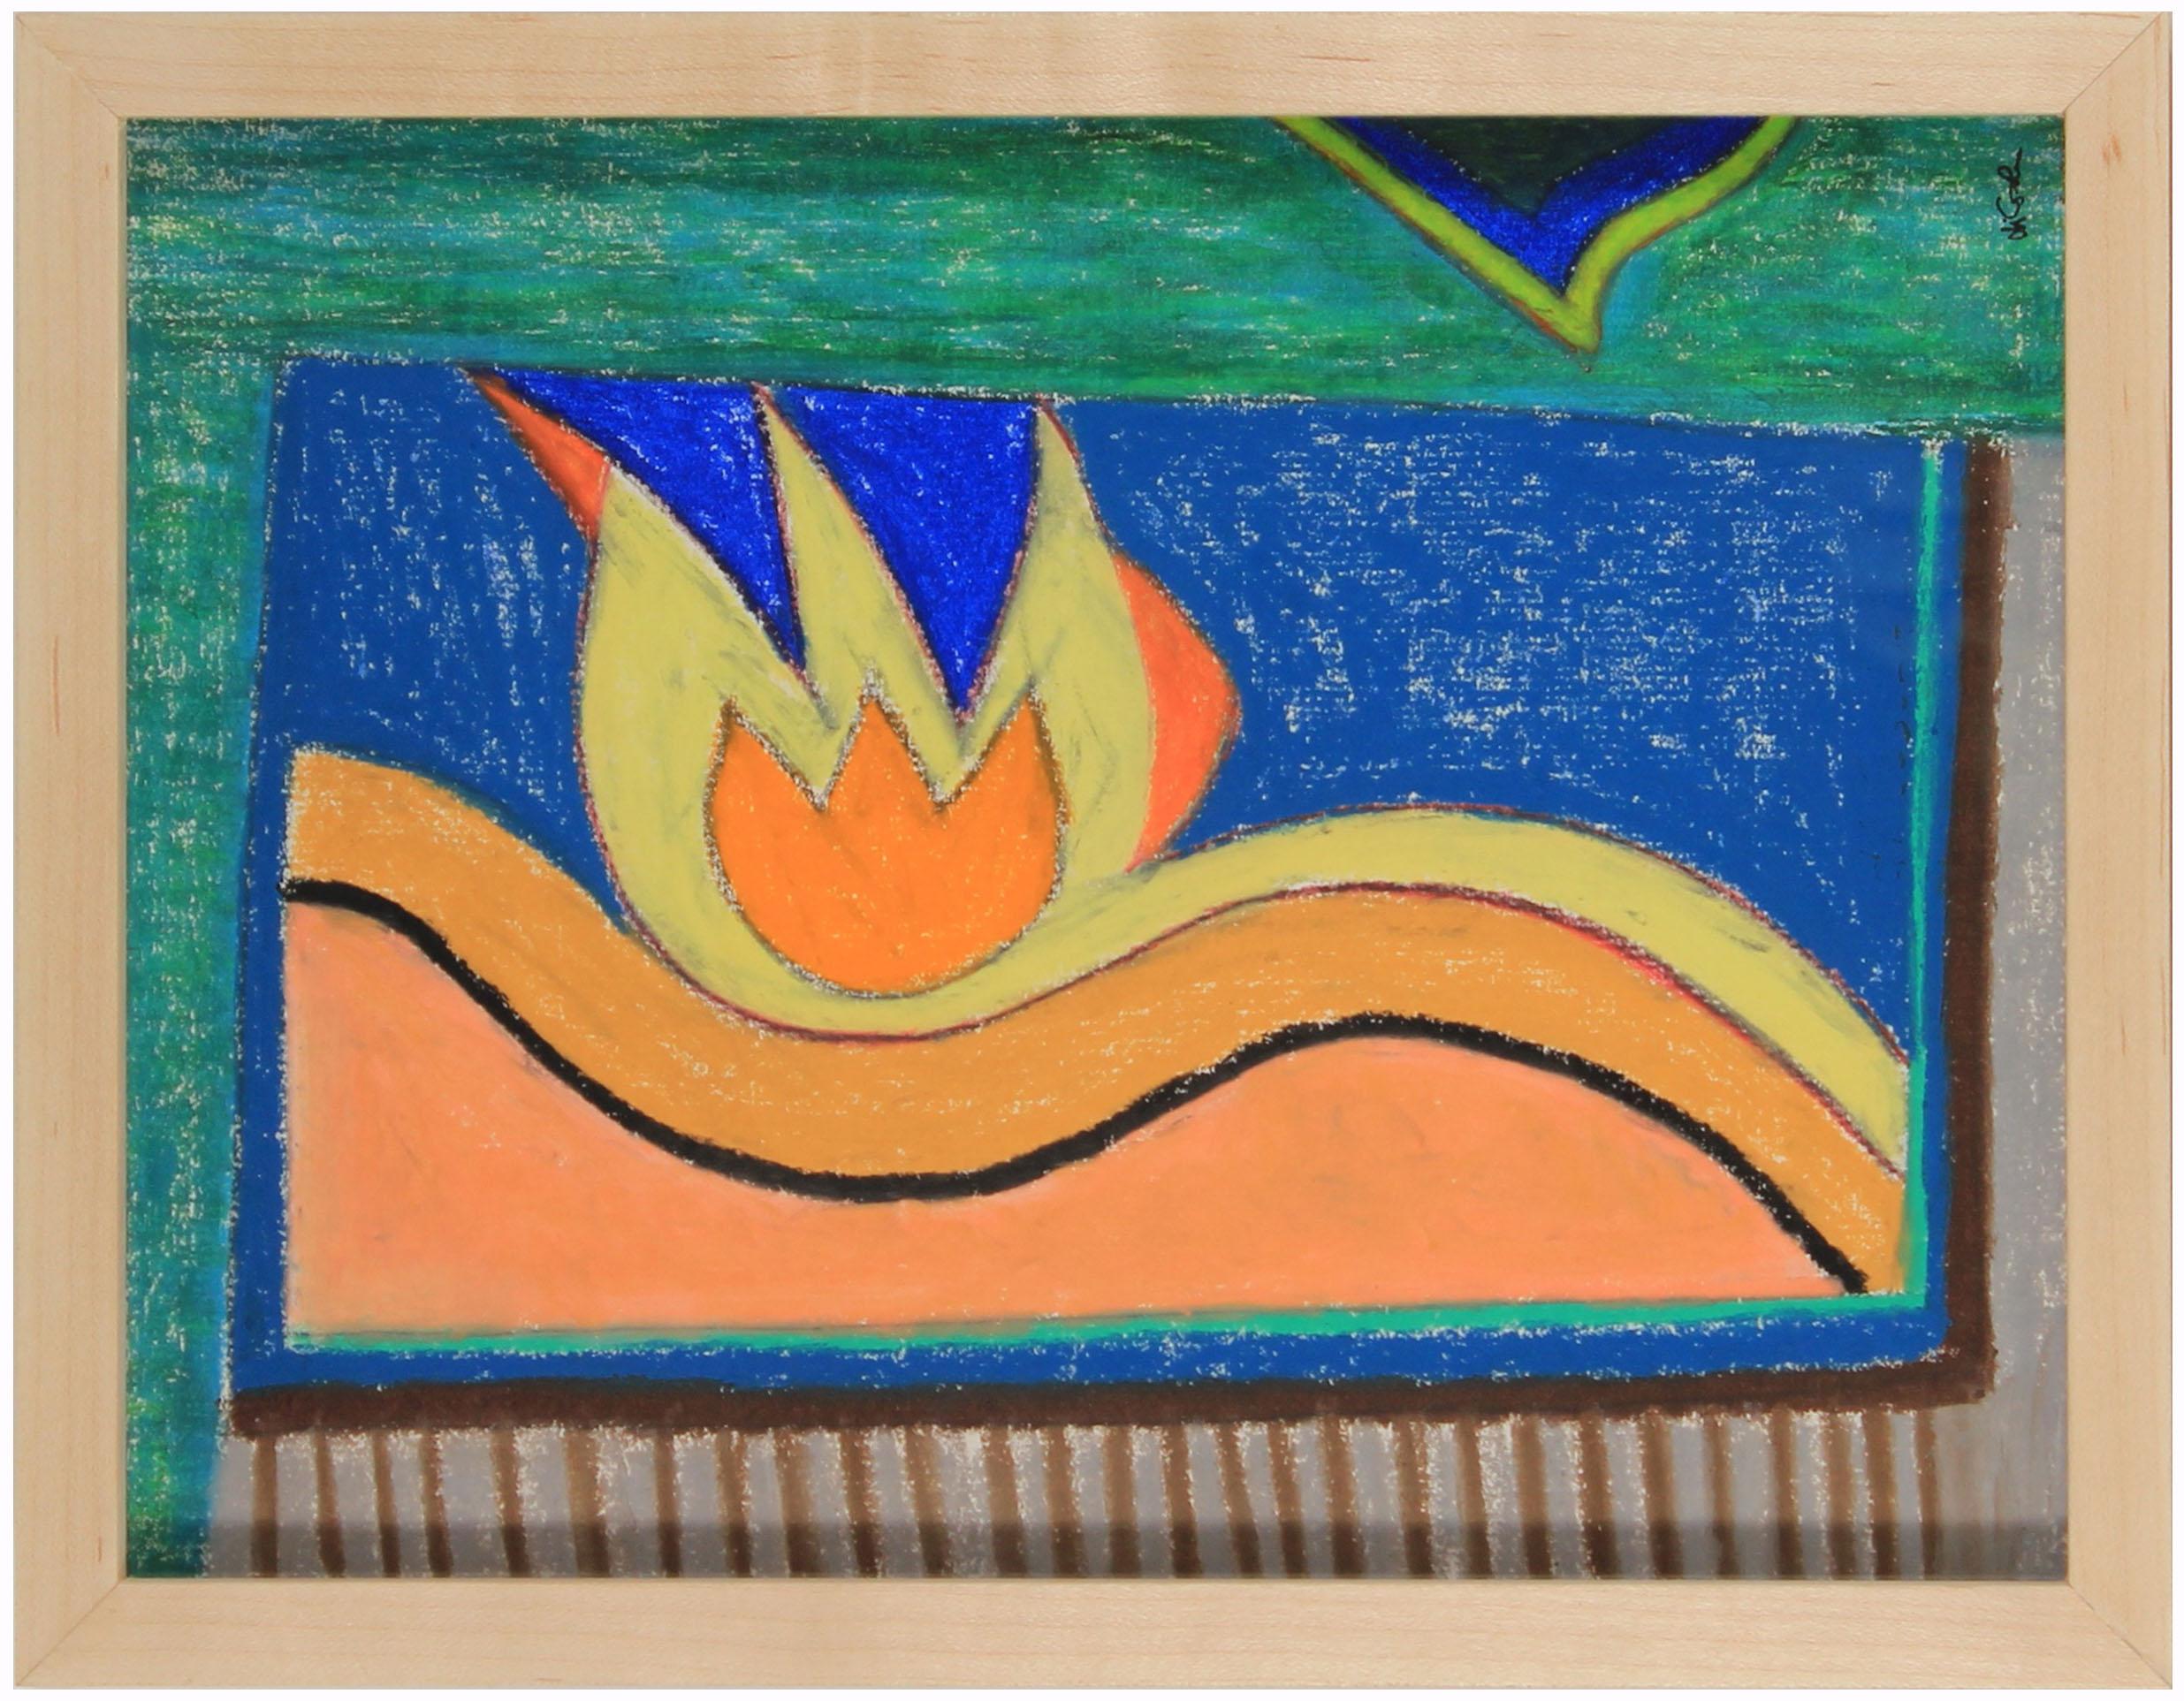 Michael di Cosola Abstract Drawing - Bright Abstract Pastel Drawing in Orange Blue Yellow and Green, August 10, 1985